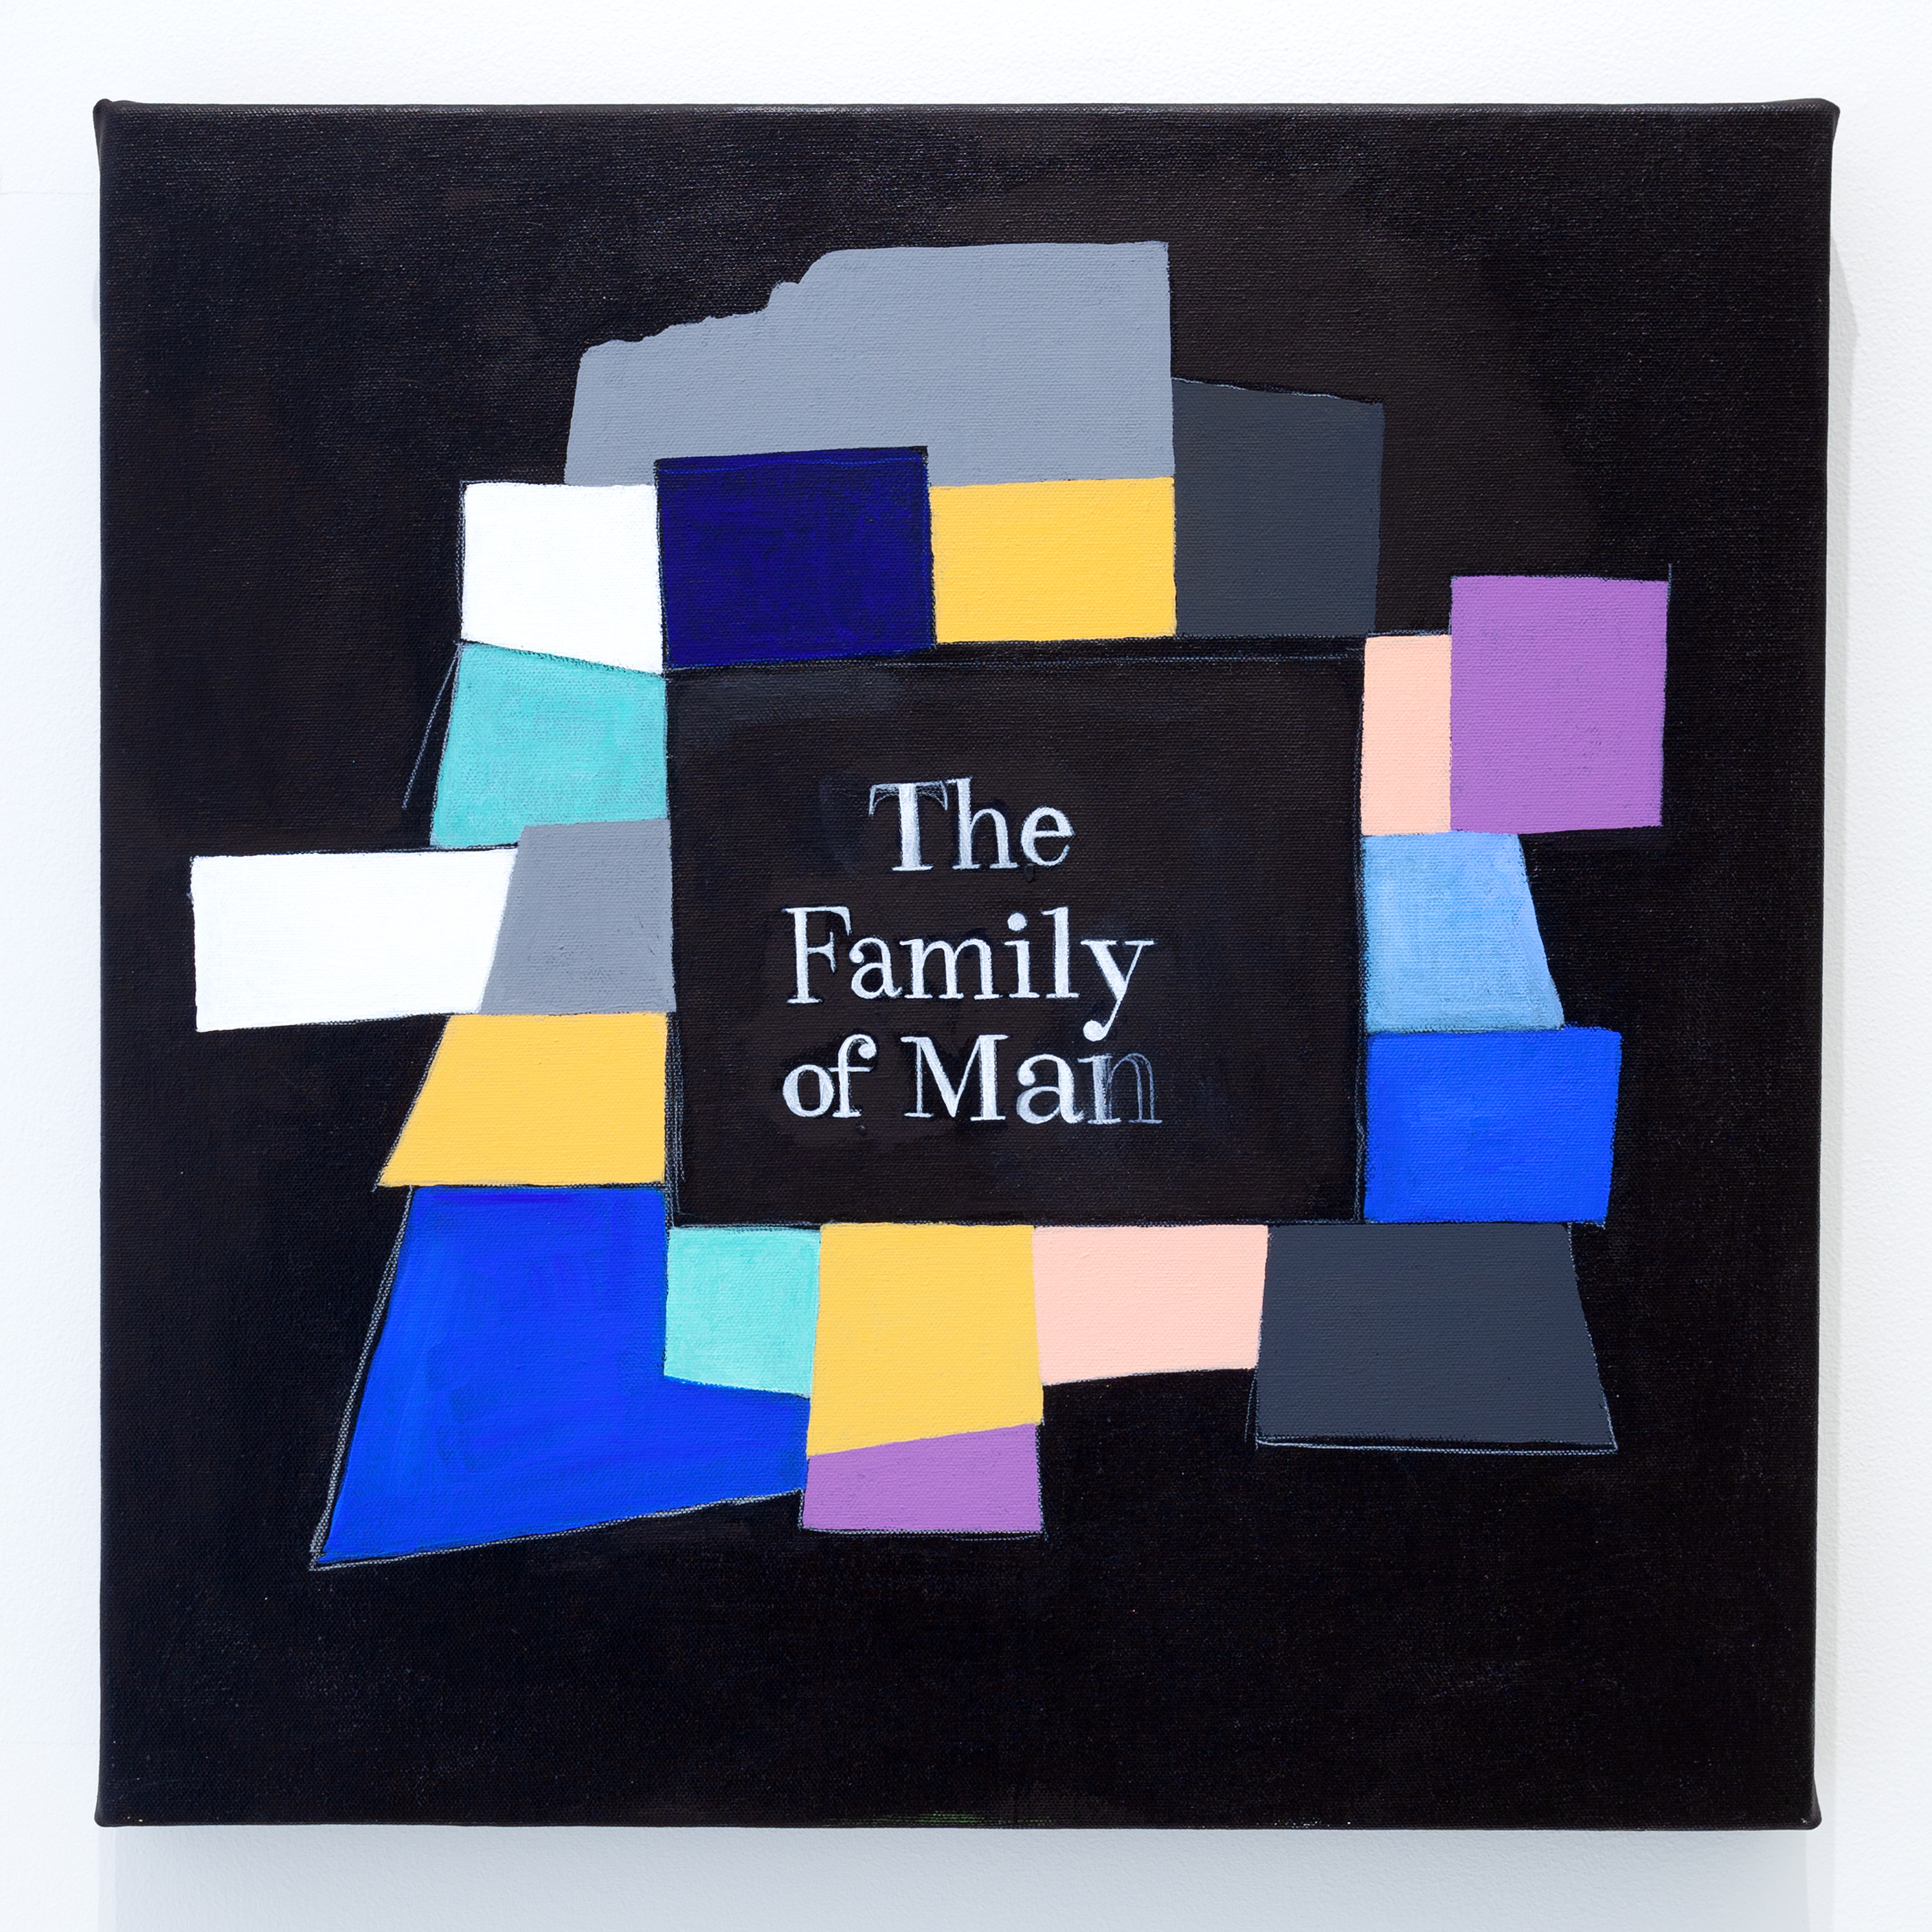 The Family of Ma, 2018